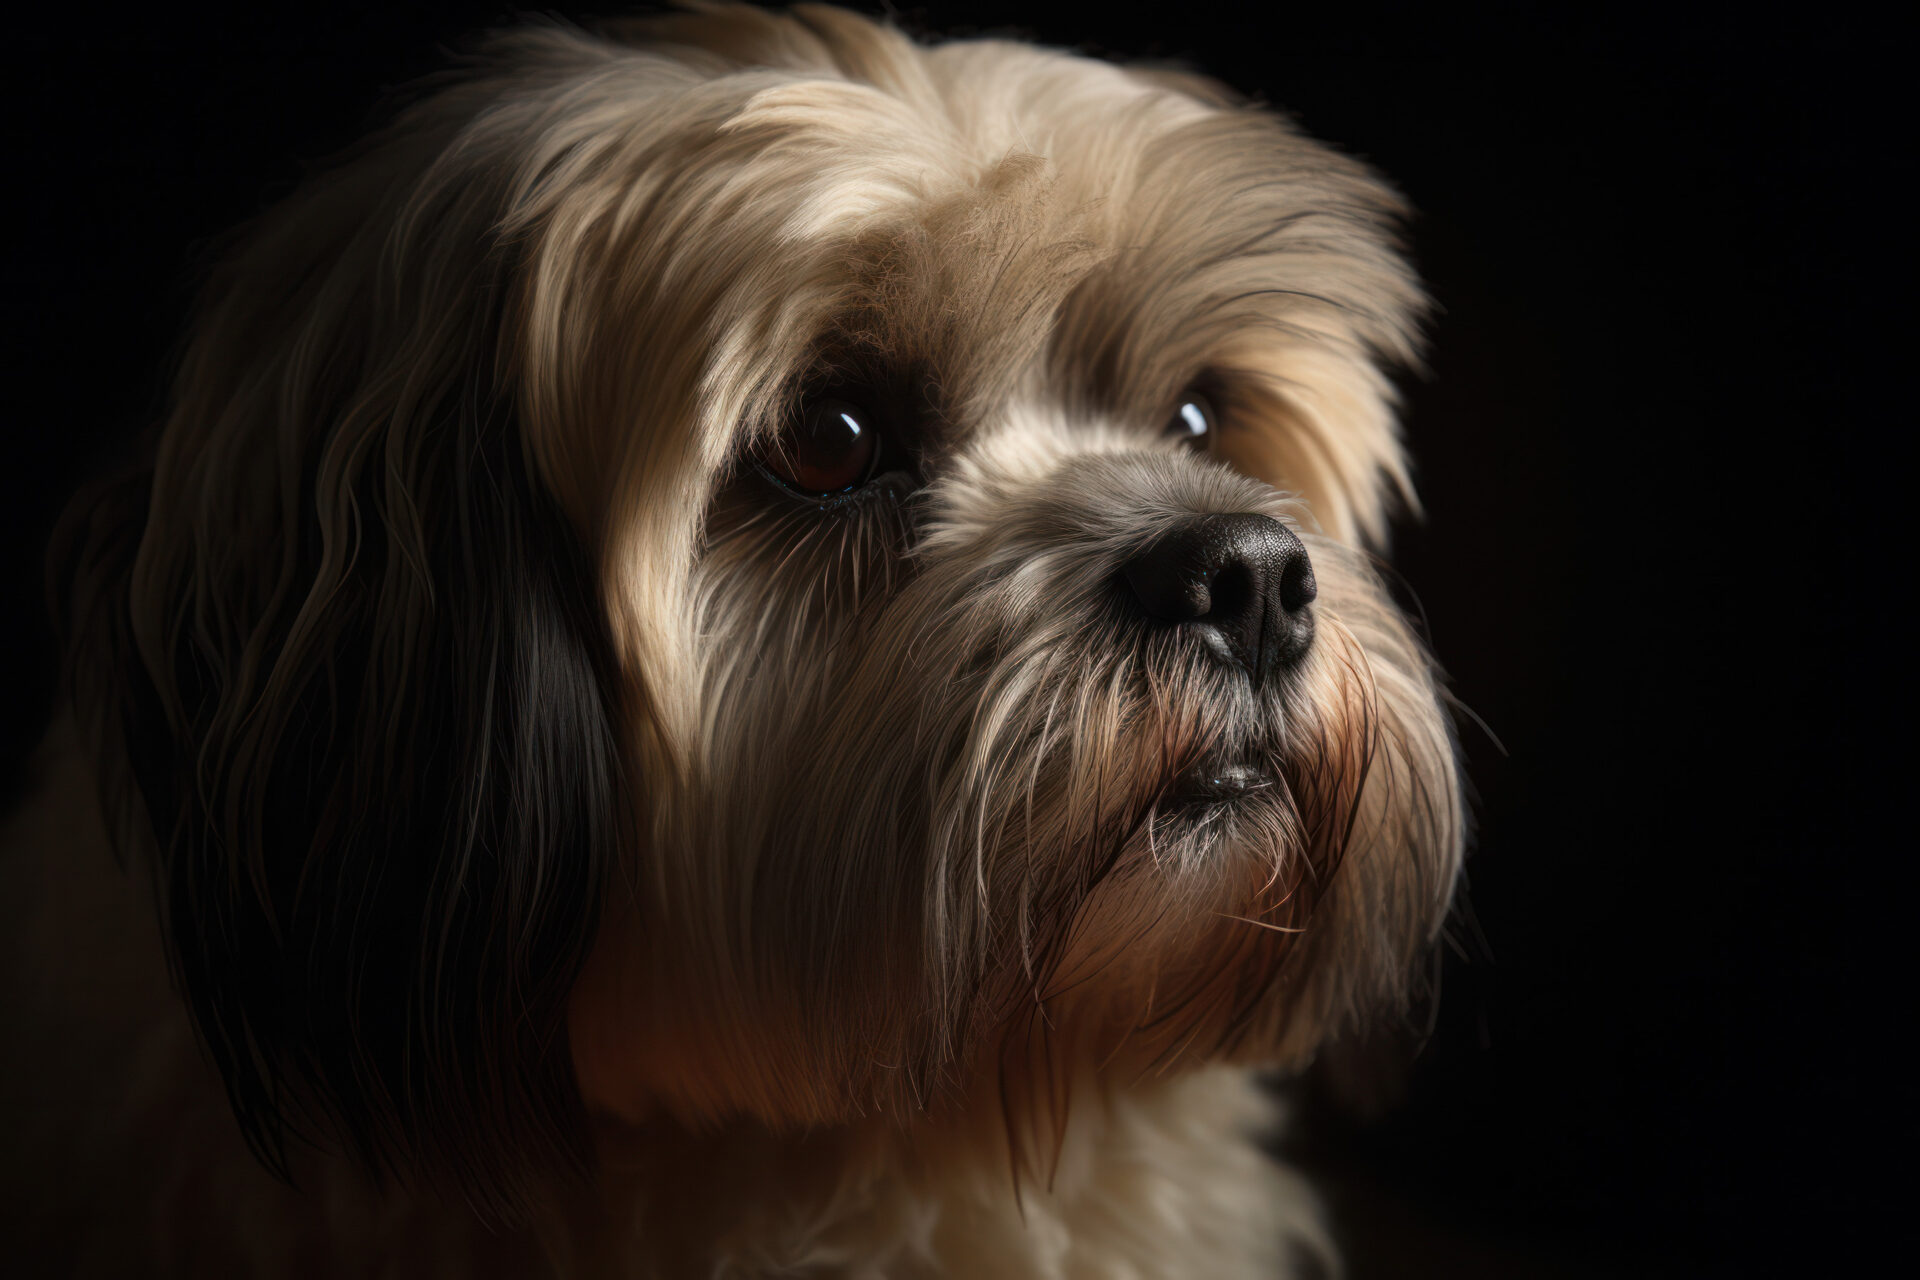 Lhasa apso dog looking very anxious, portrait photography